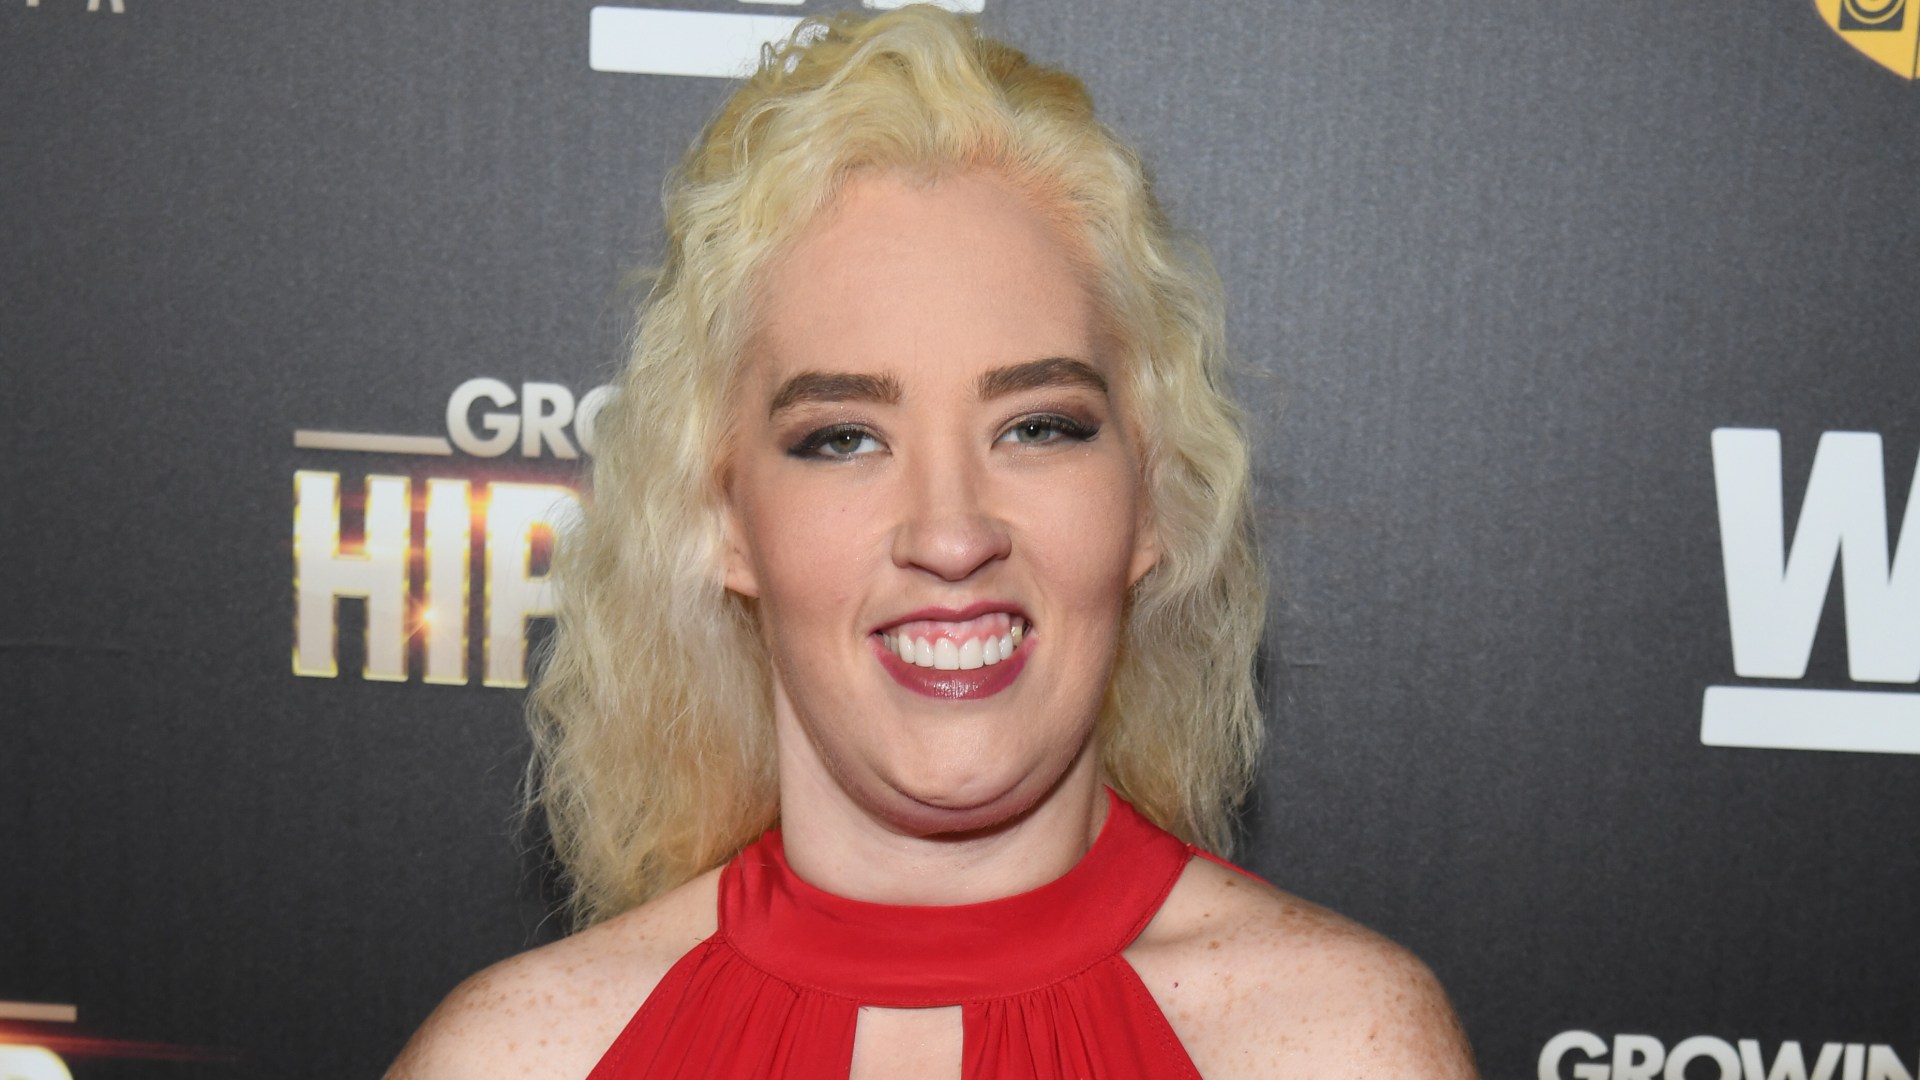 Mama June’s New Look The Reality Star Wants to Make a Workout Video!